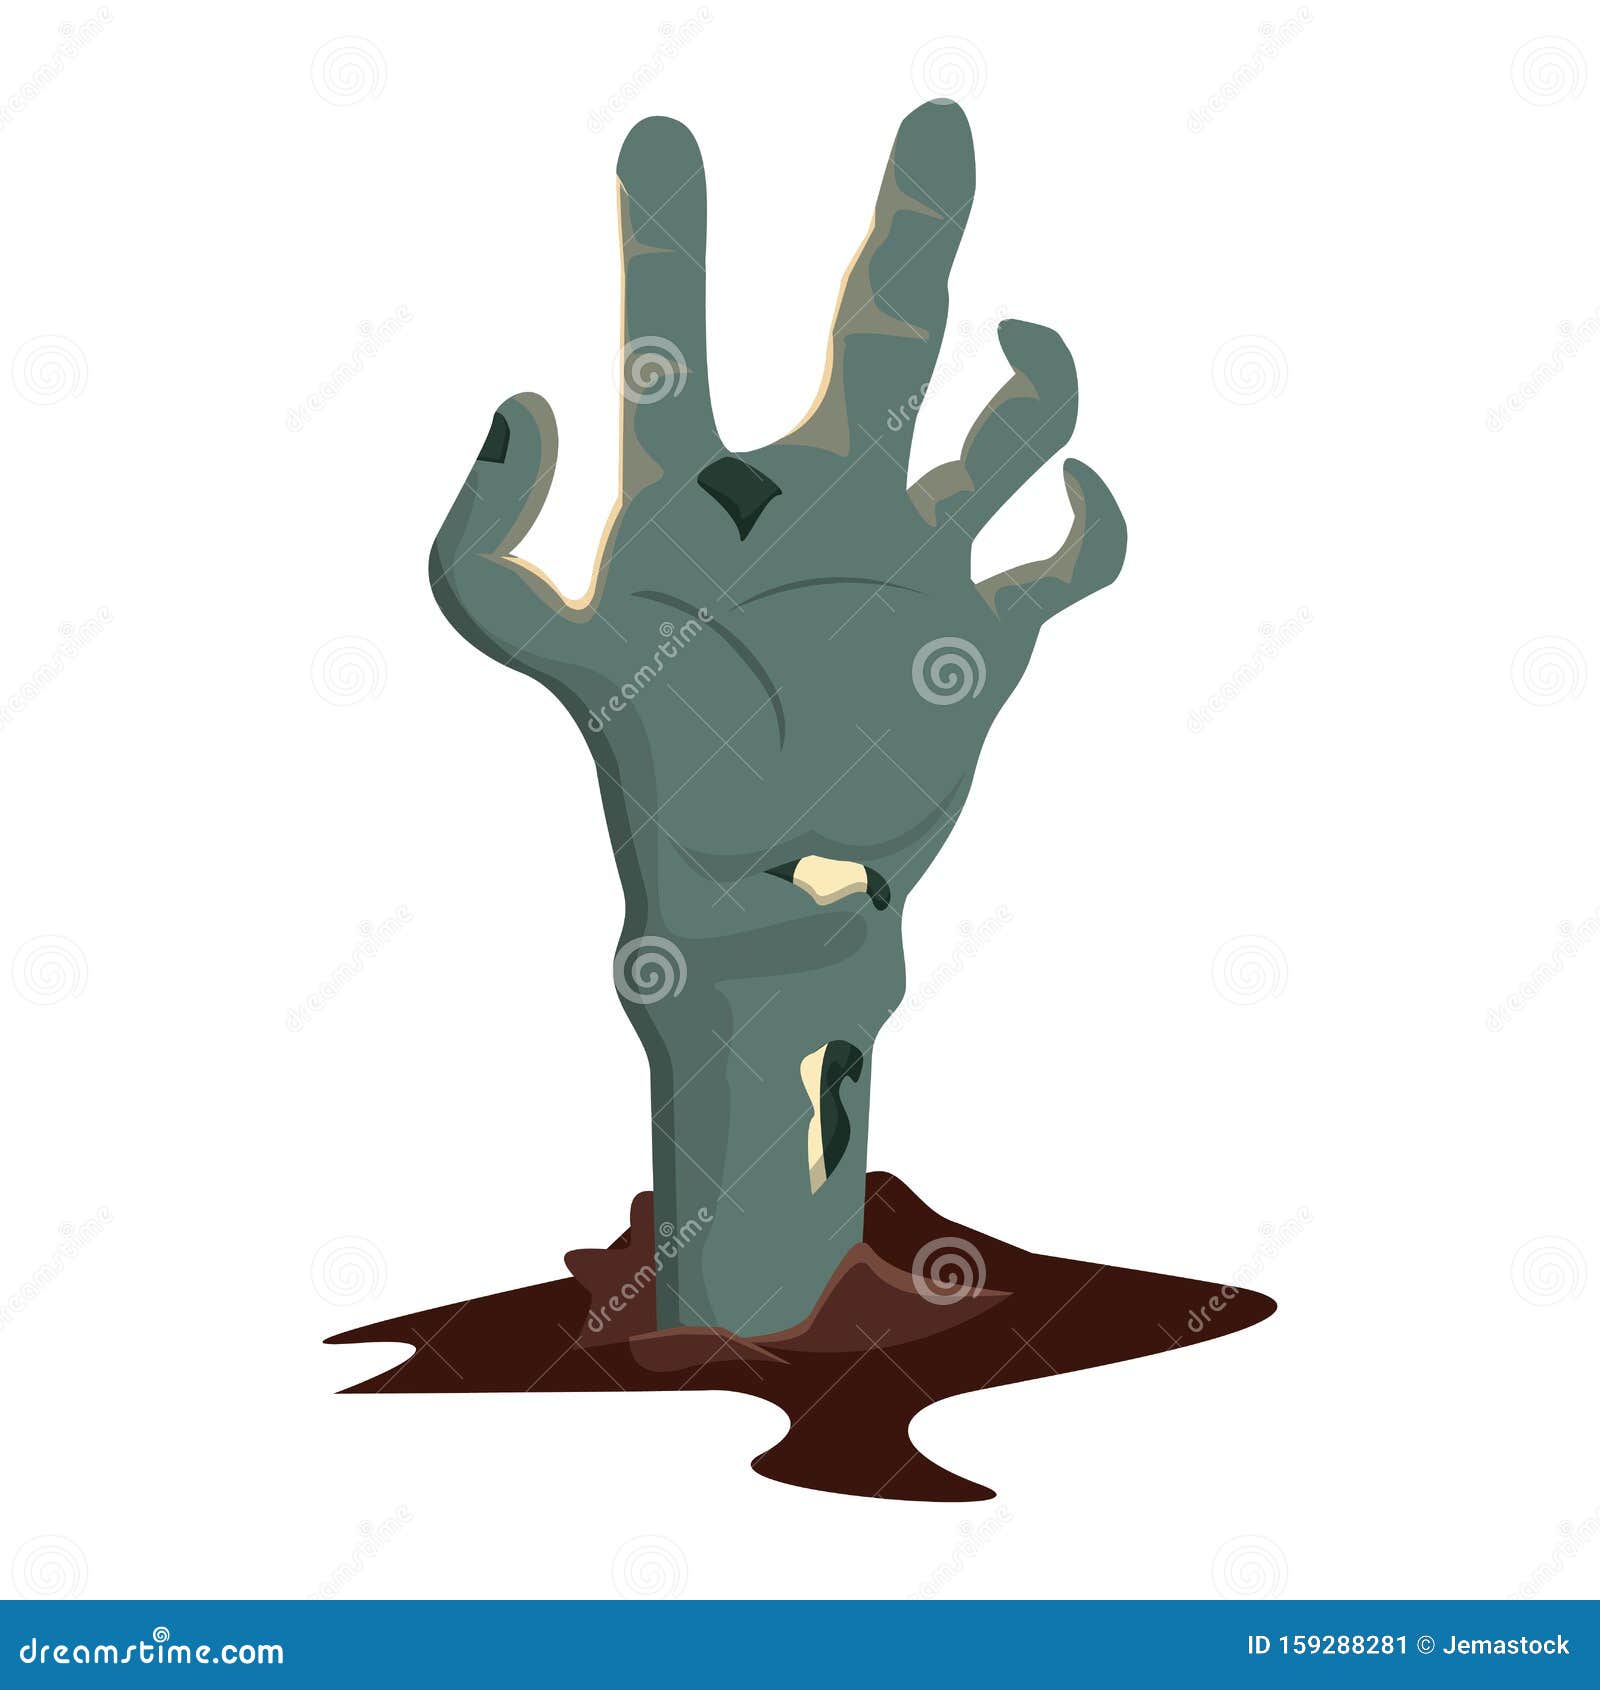 Premium Vector | Creepy zombie hands silhouette crooked lambs stick out of graveyard ground ...